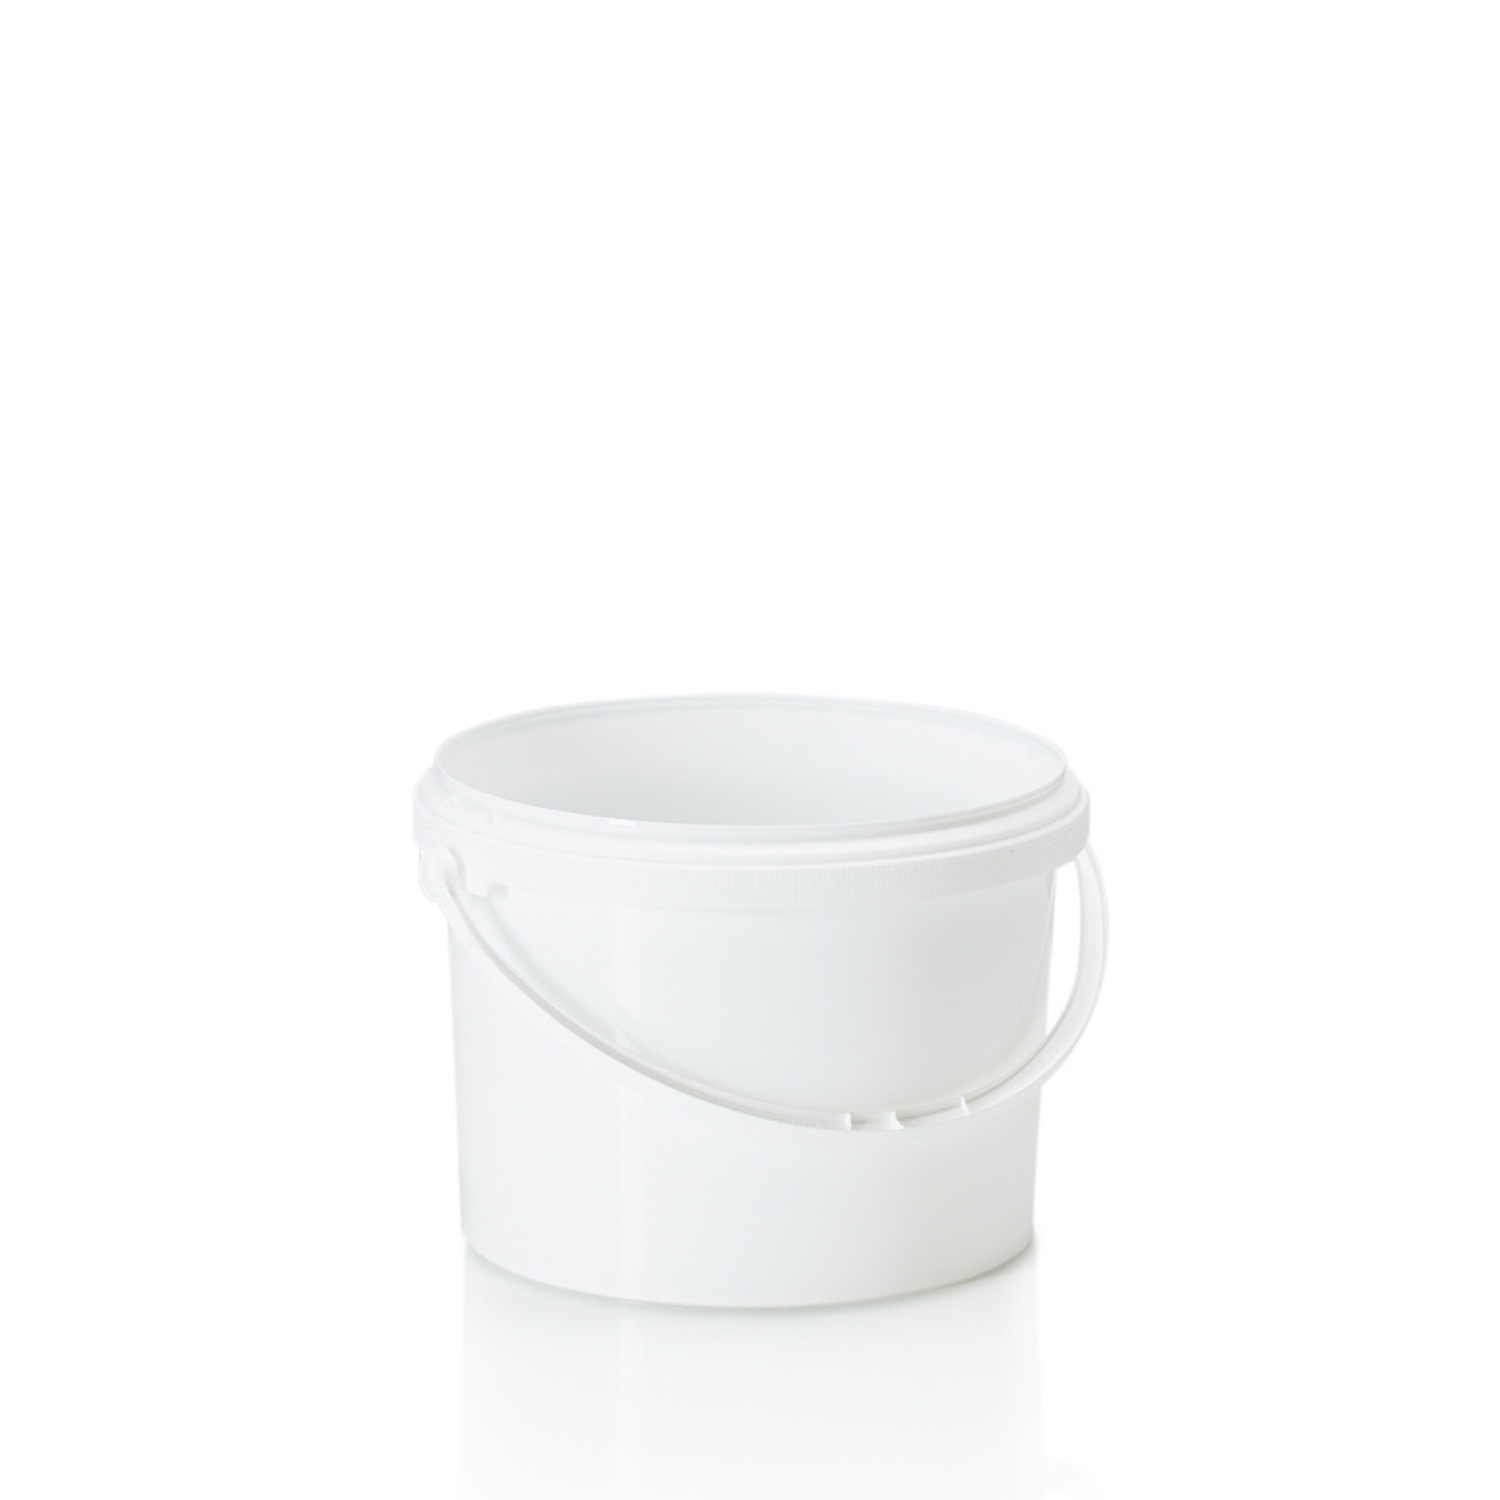 3.1ltr White PP Tamper Evident Pail with Plastic Handle